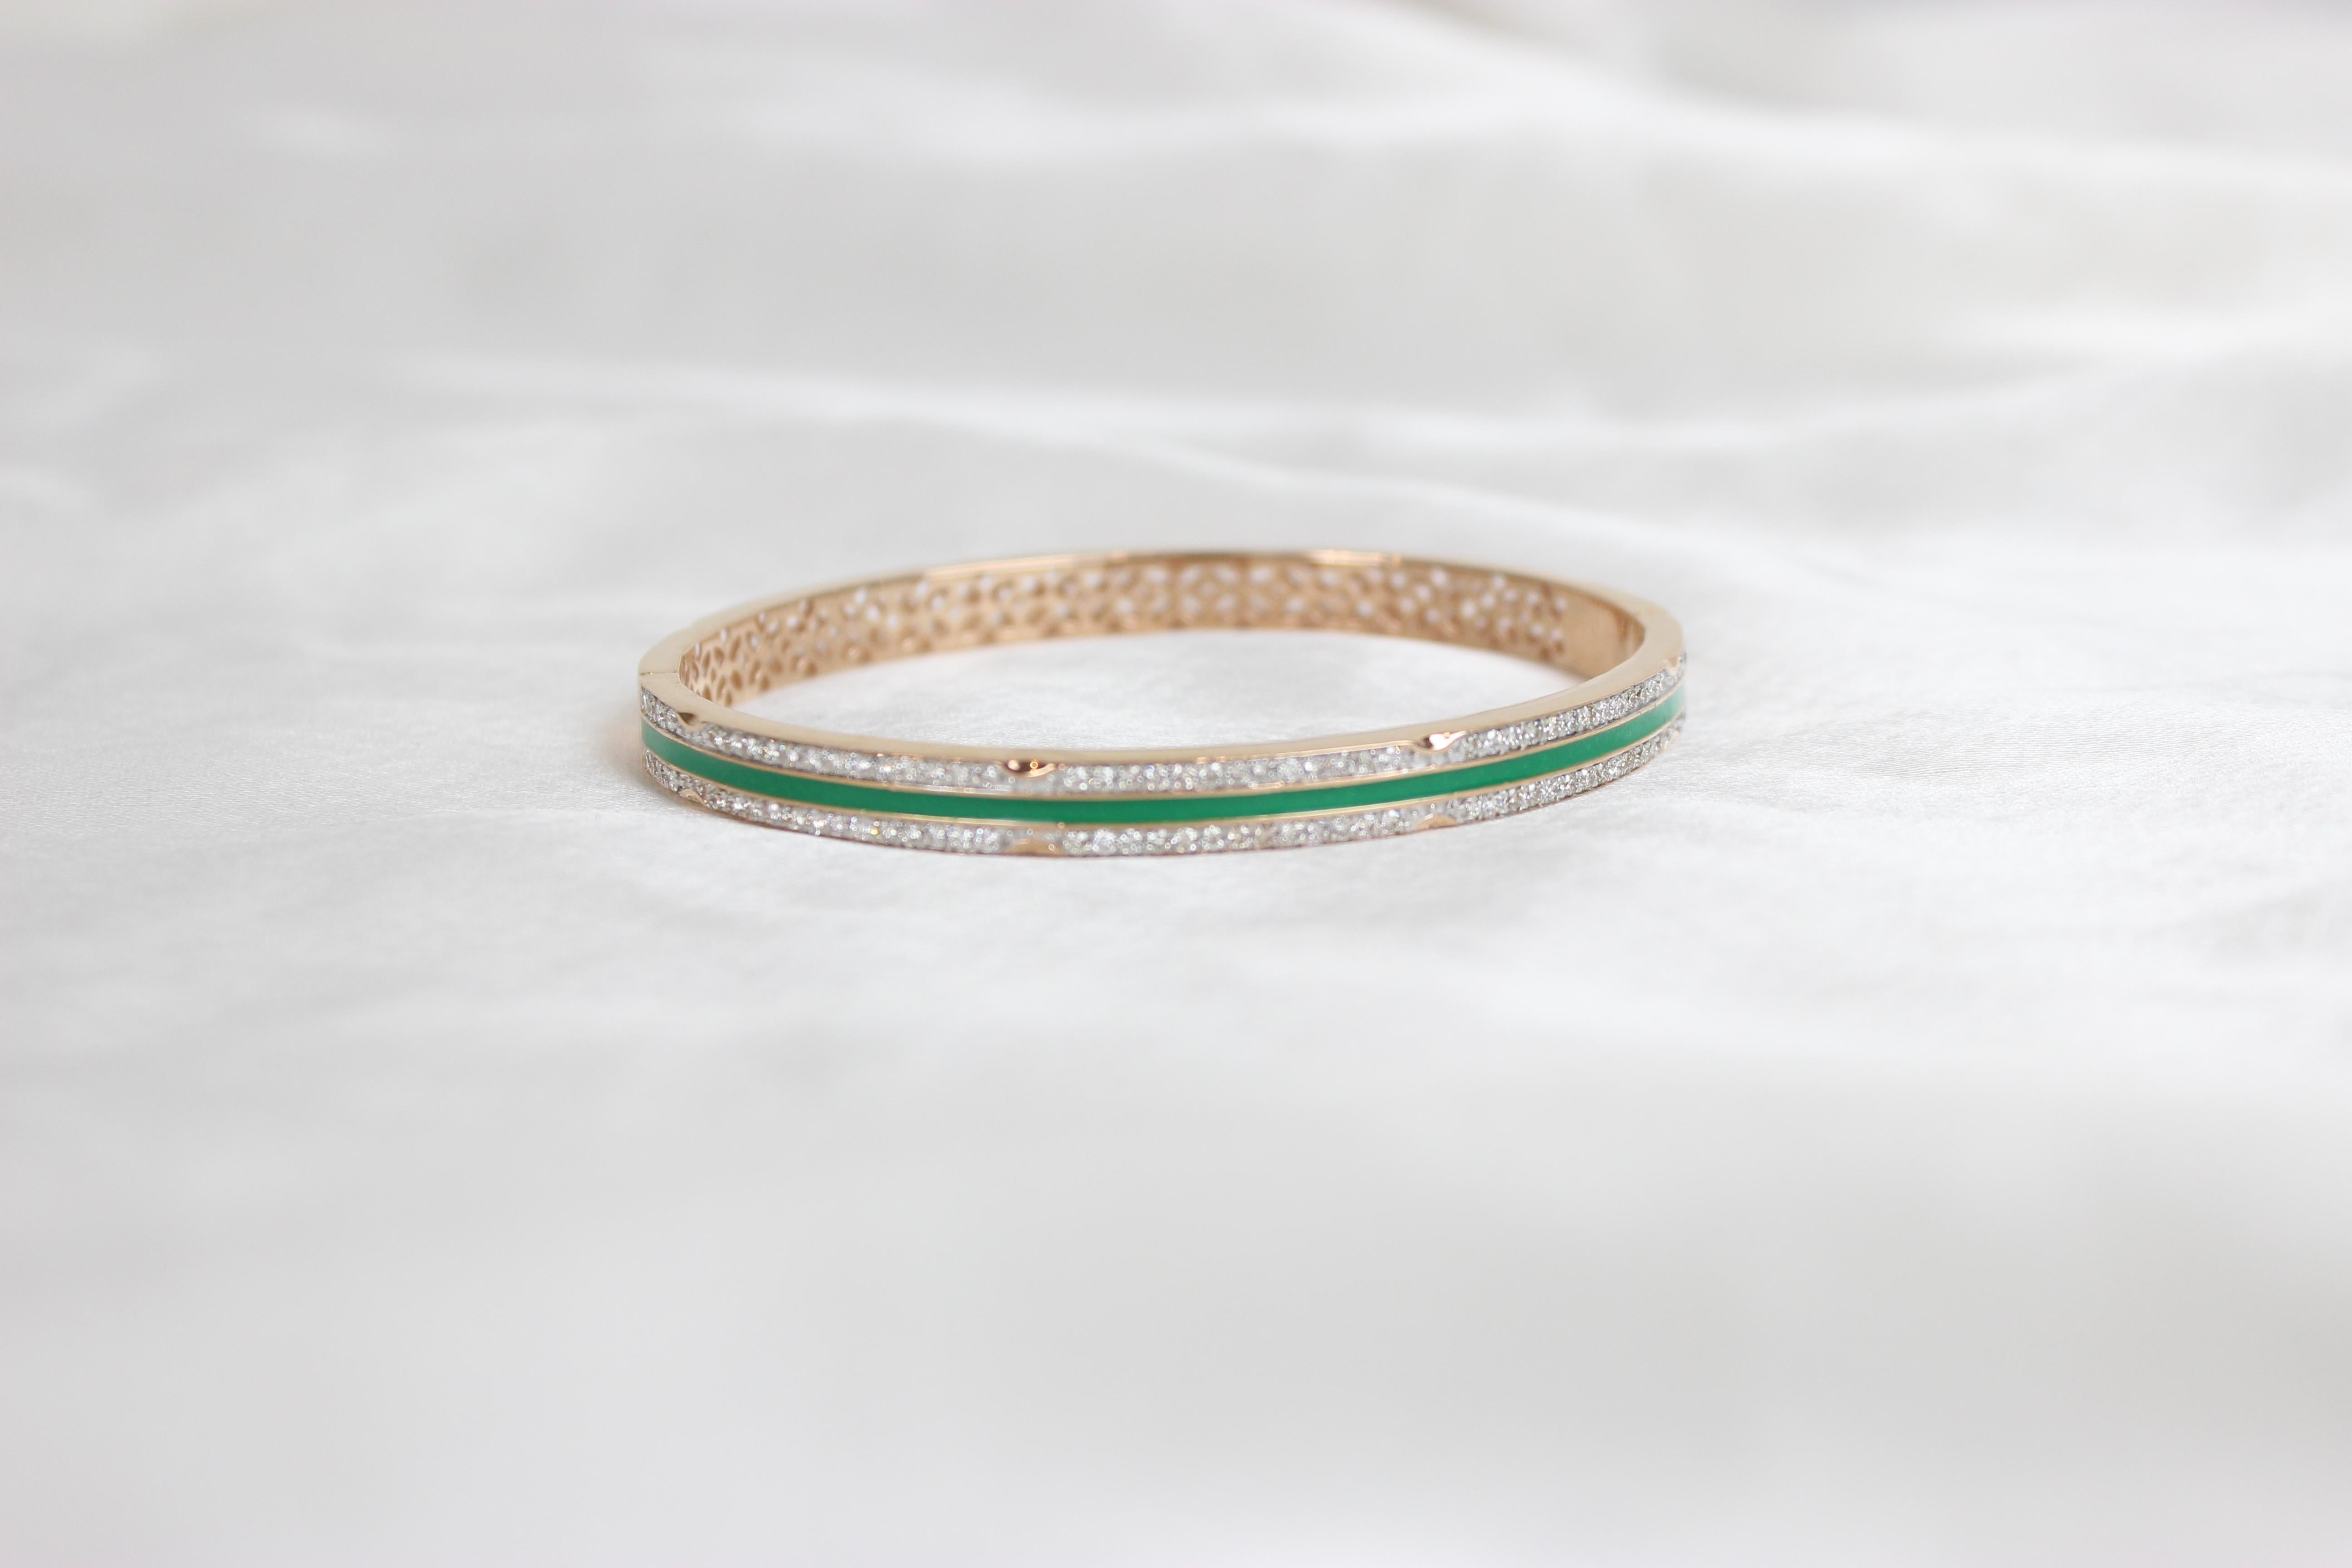 The Filigree Diamond Bracelet with Green Enamelling set in 18k Solid Gold is a breathtaking piece of jewelry that combines the intricacy of filigree work with the beauty of diamonds and green enameling. This bracelet is a true testament to fine